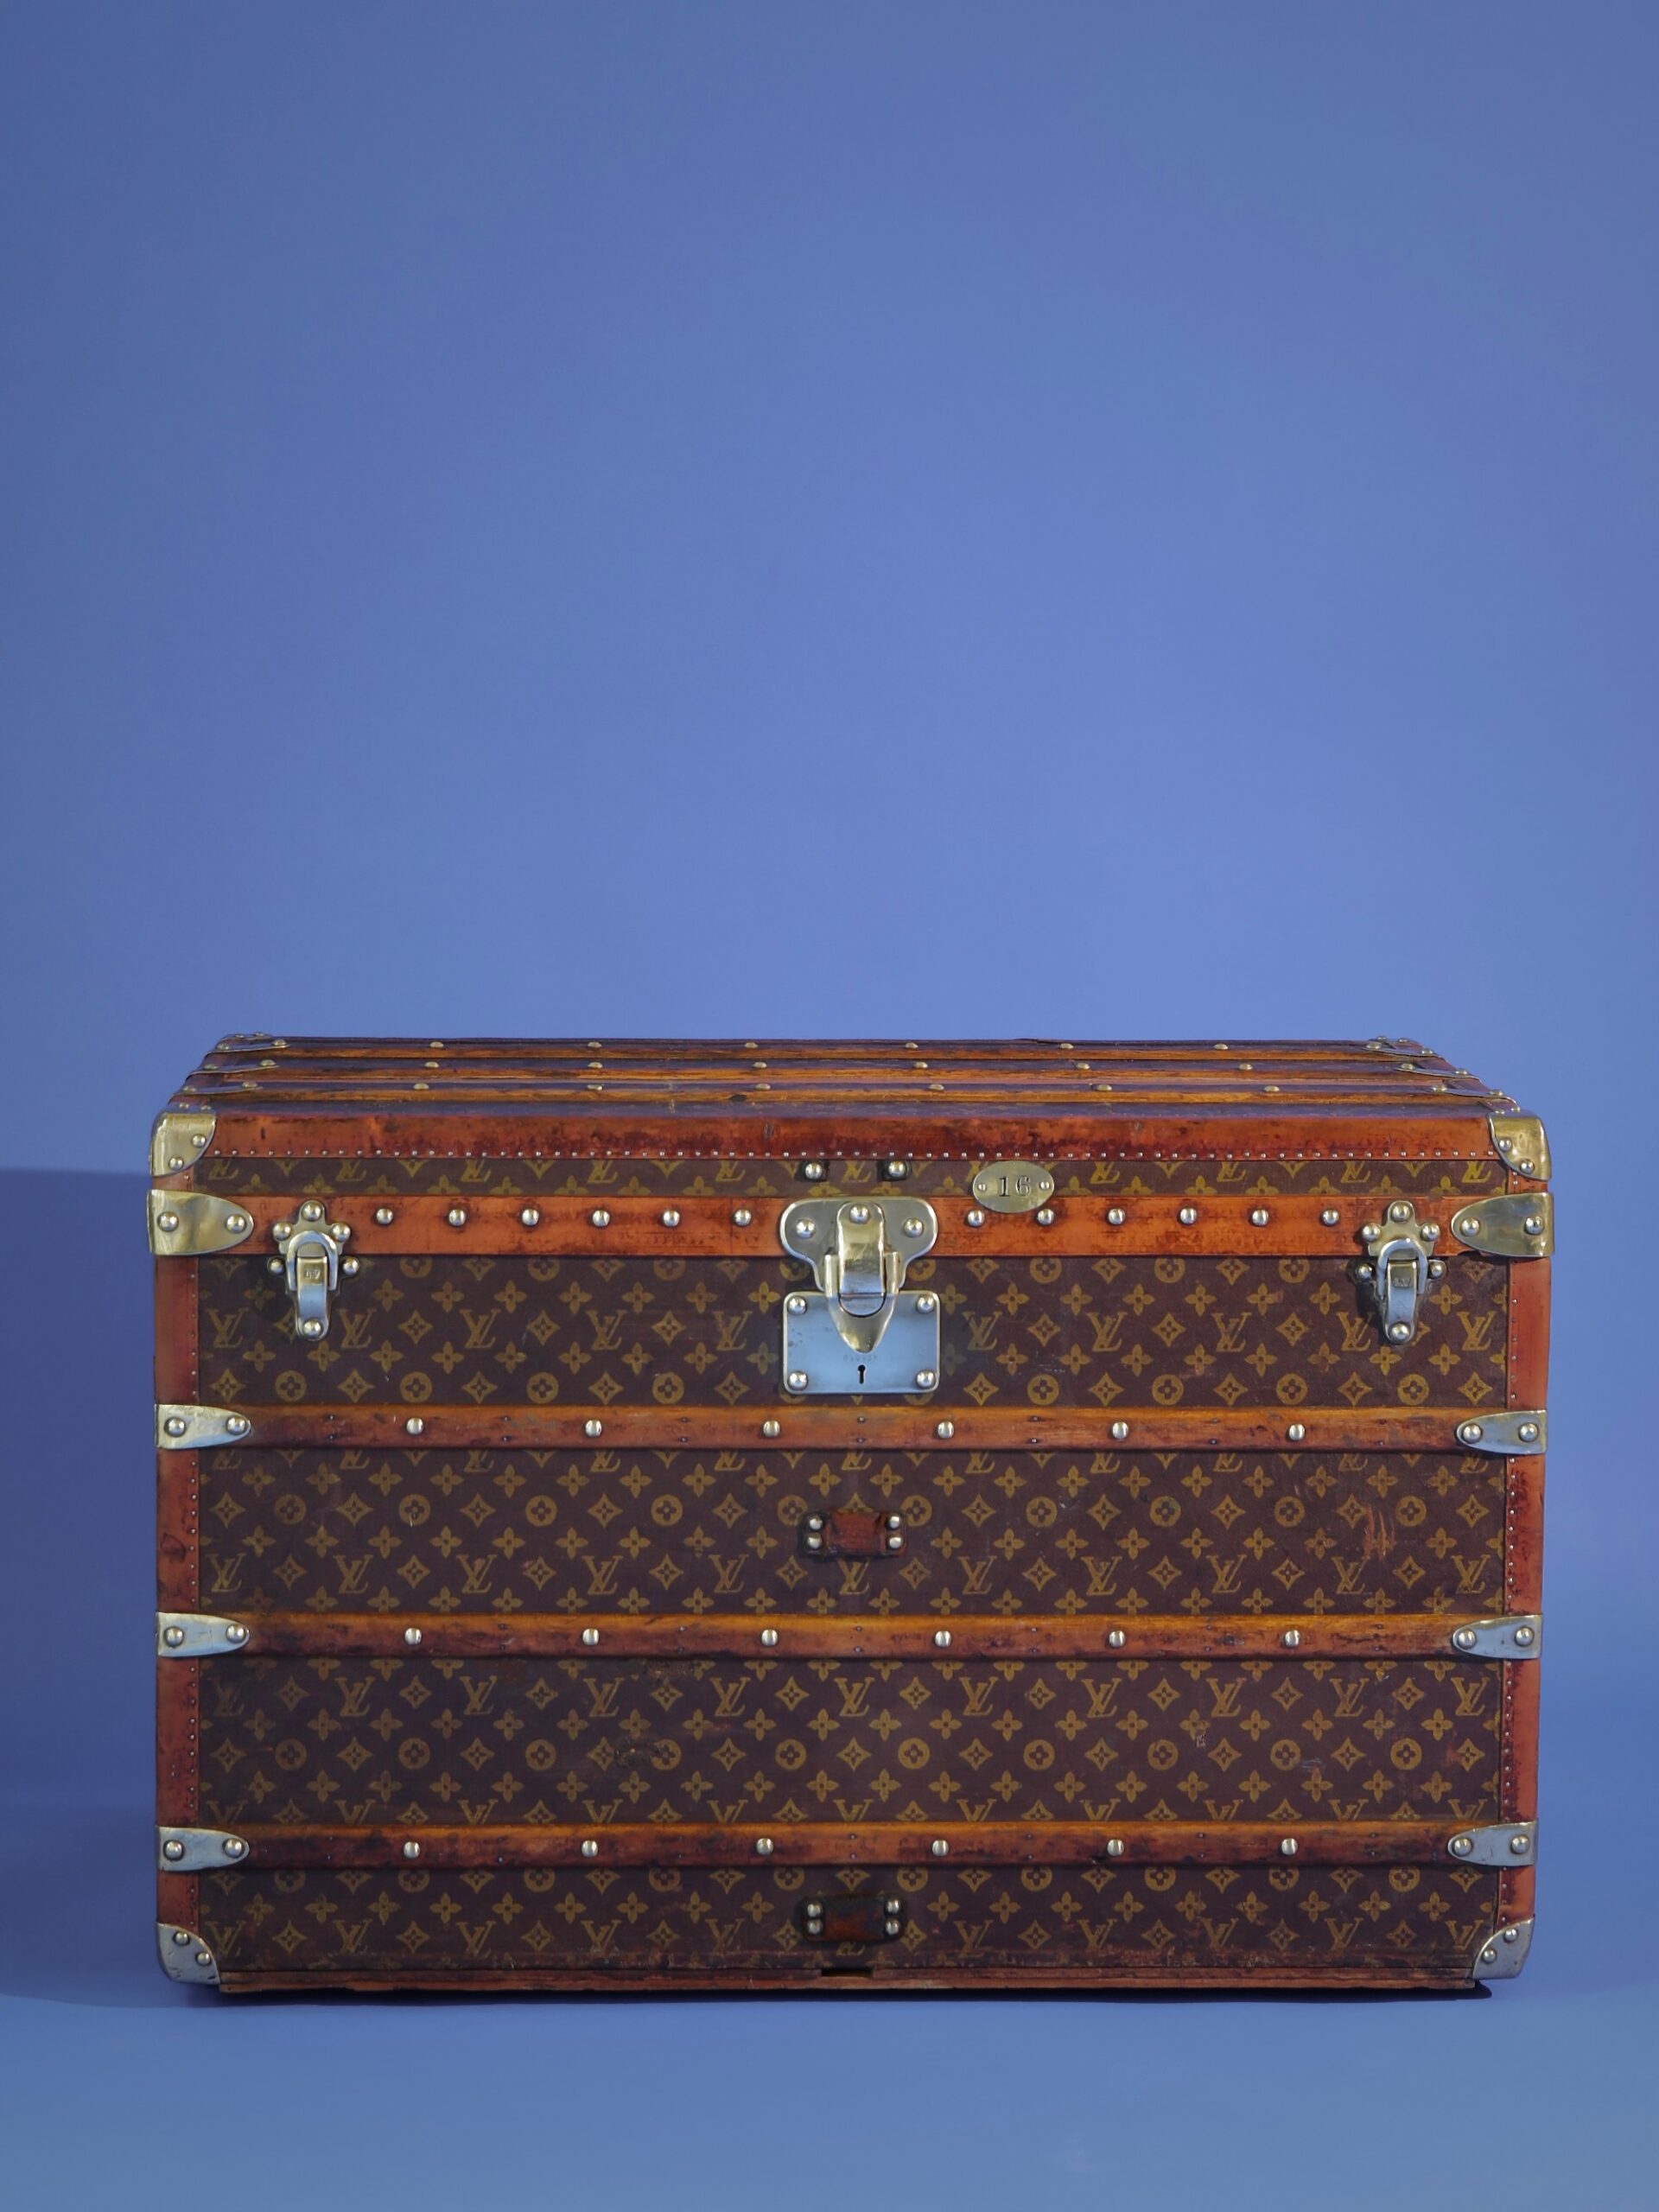 the-well-traveled-trunk-louis-vuitton-thumbnail-product-5759-1